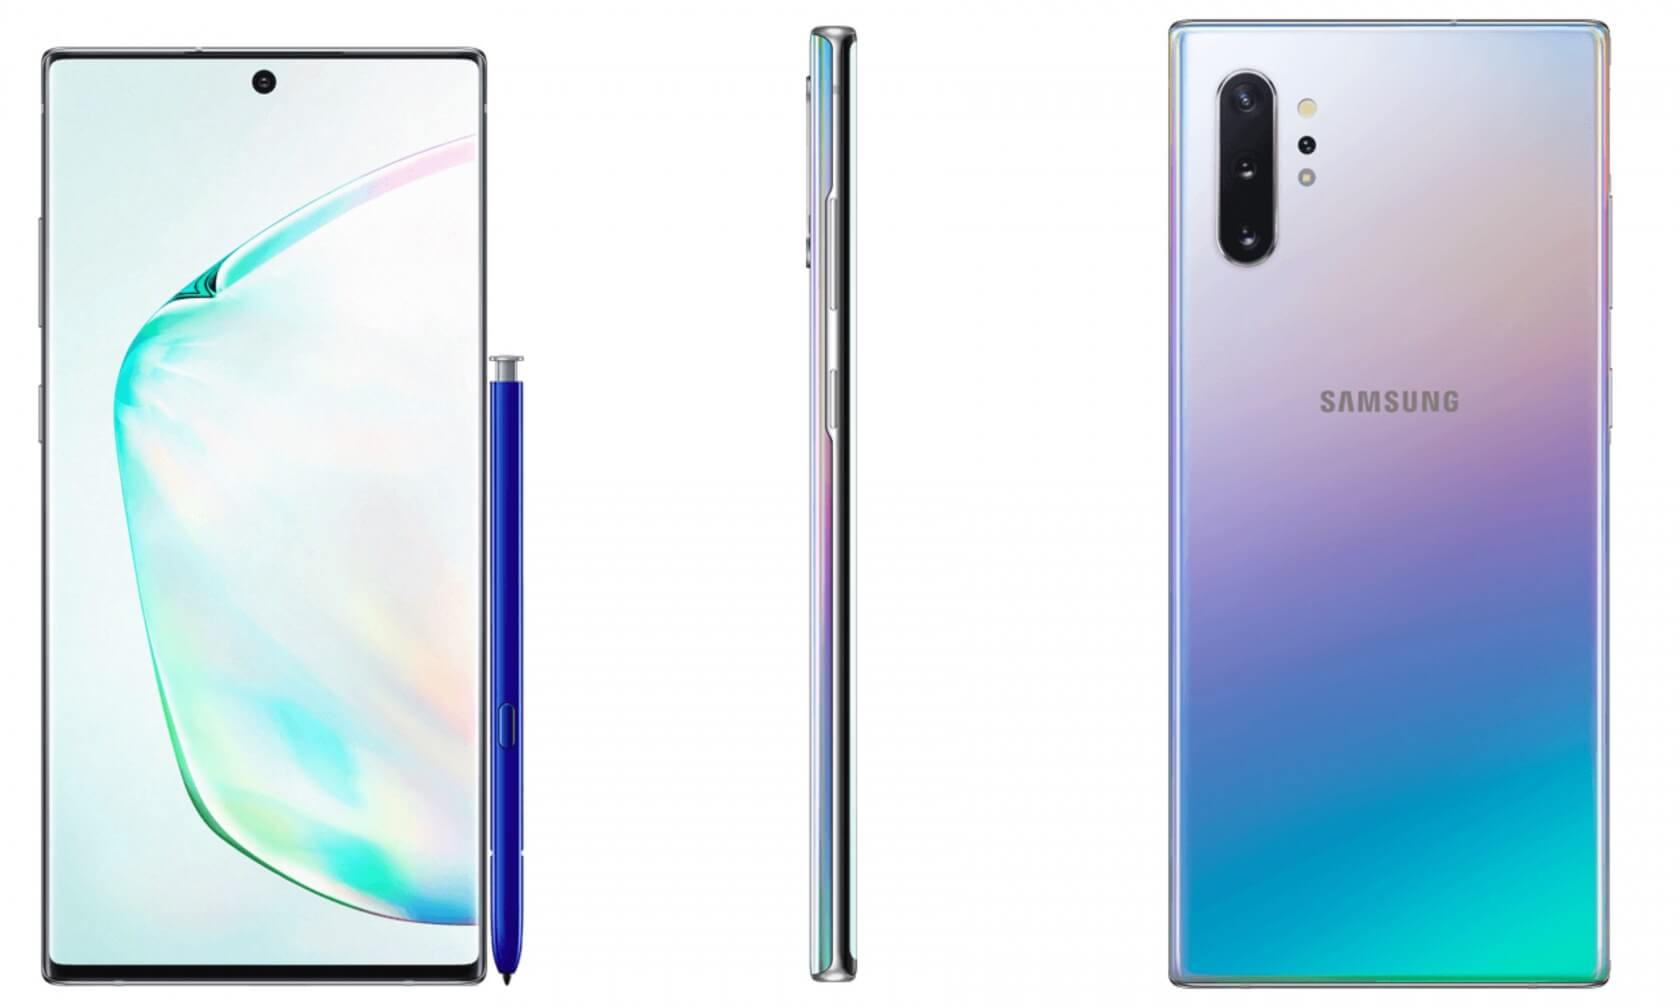 Leaked Samsung Galaxy Note 10 photos have hit the web